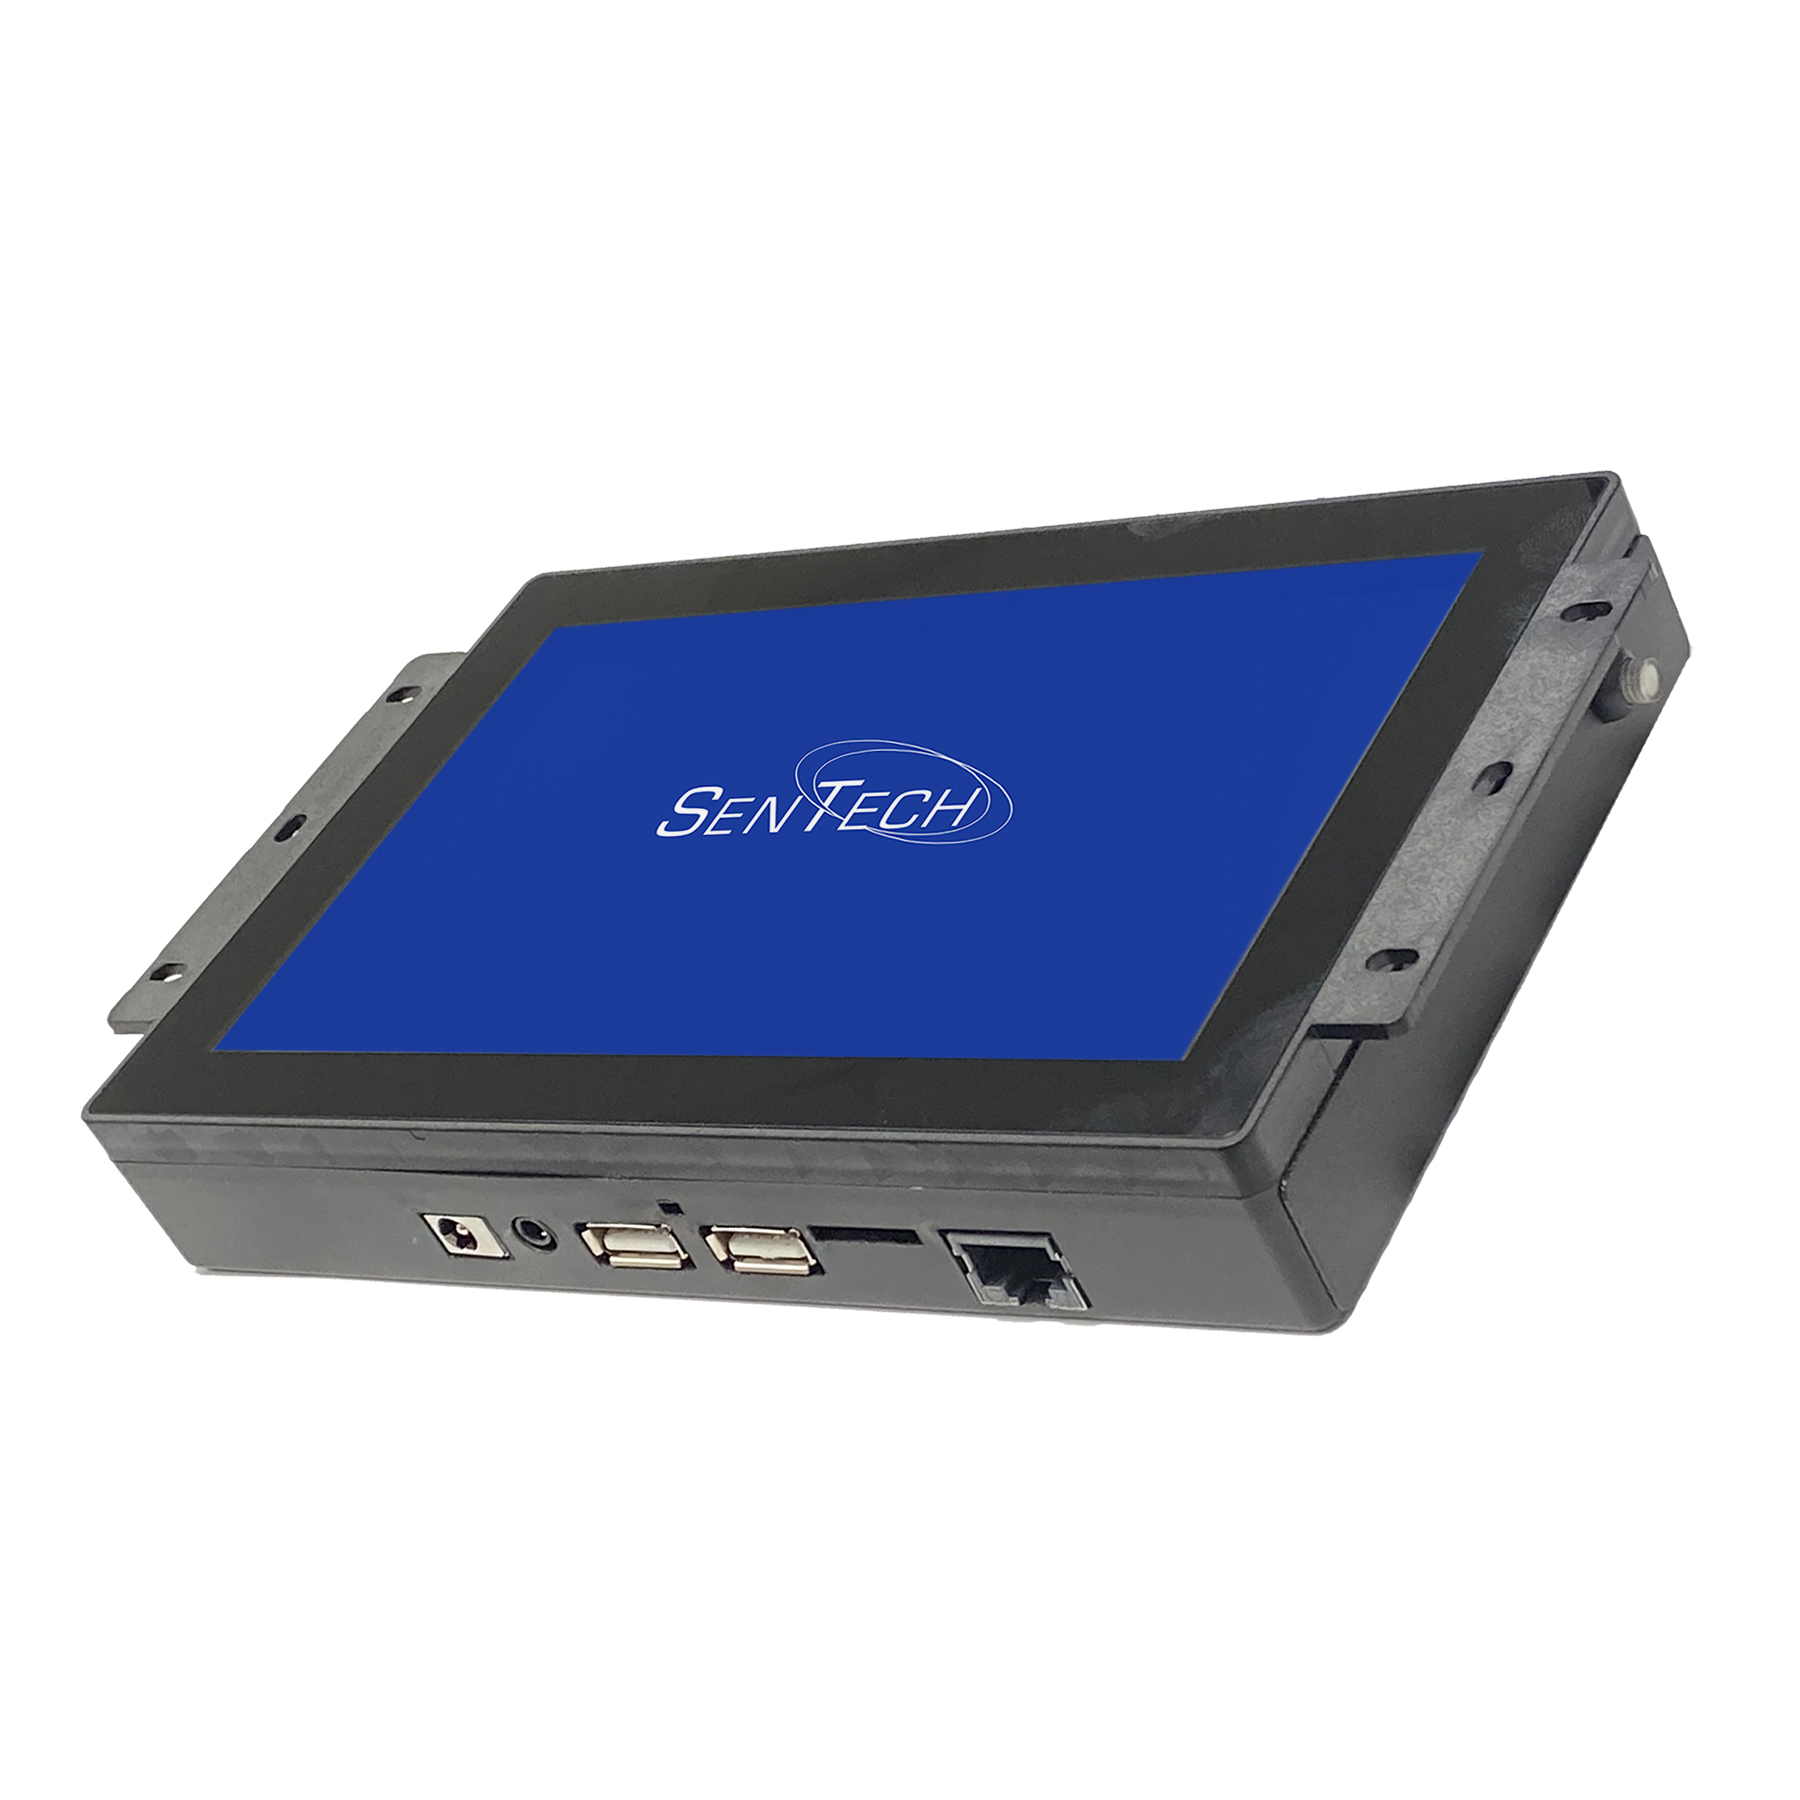 SenTech Acousto-Magnetic AM and Radio Frequency RF EAS Systems are compatible with Sensormatic TYCO and Checkpoint Systems